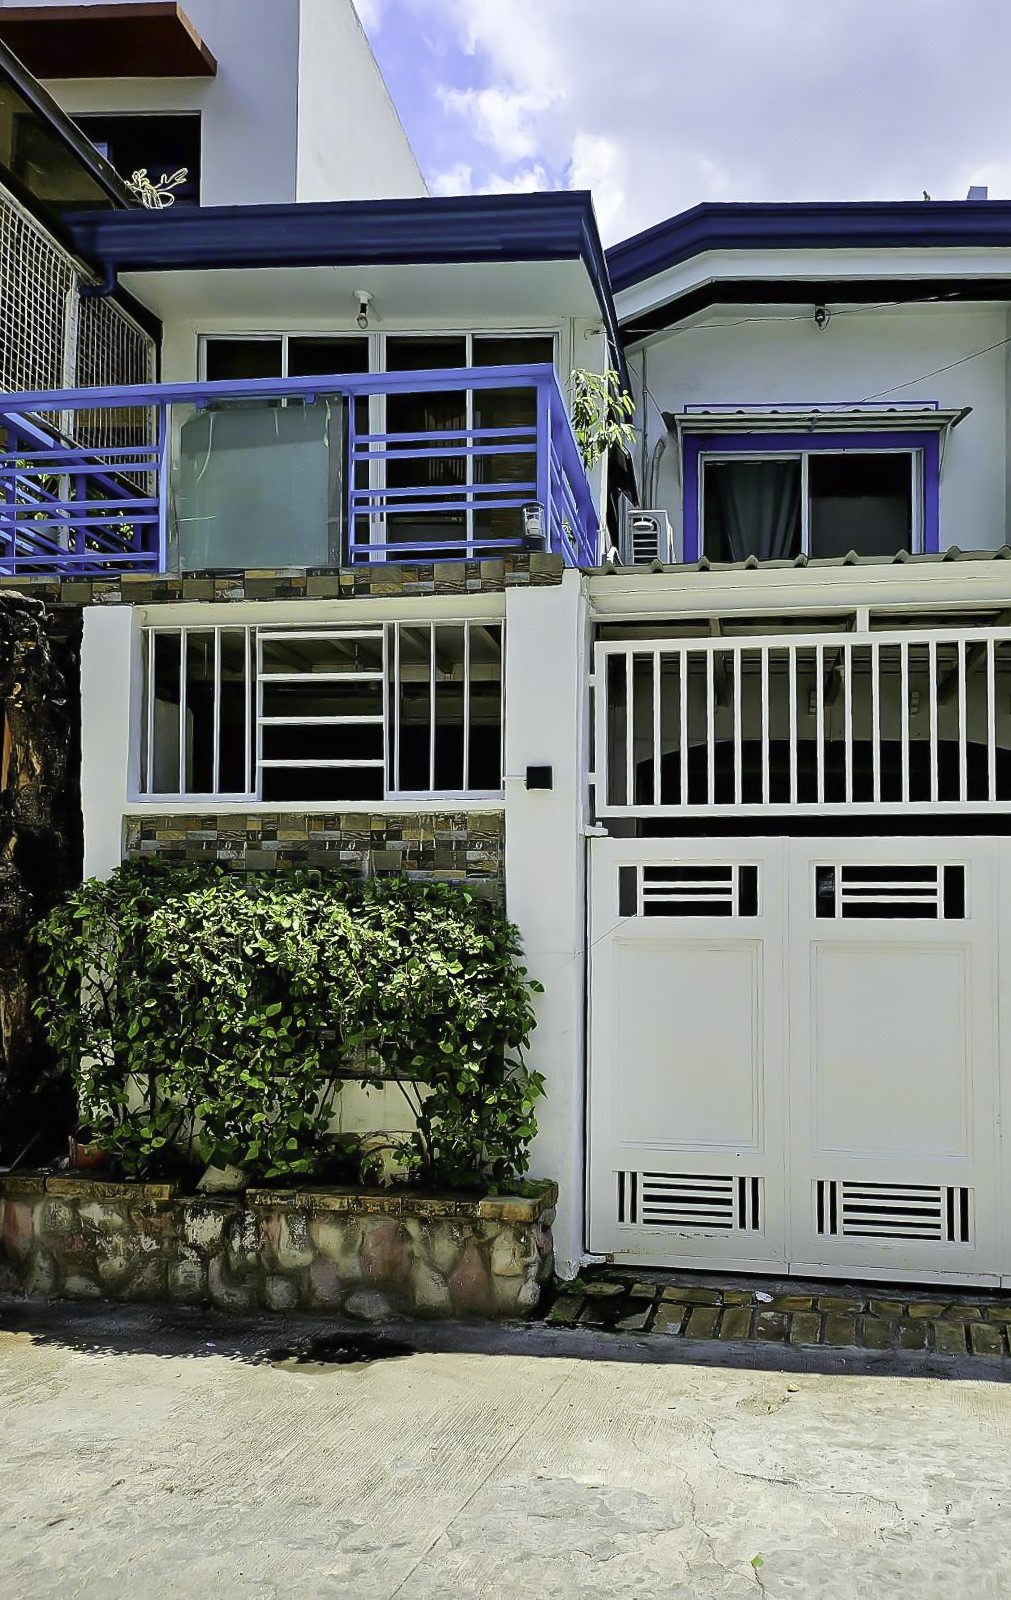 For Sale: 2 Storey House in Pasig Greenland Village, Pasig City